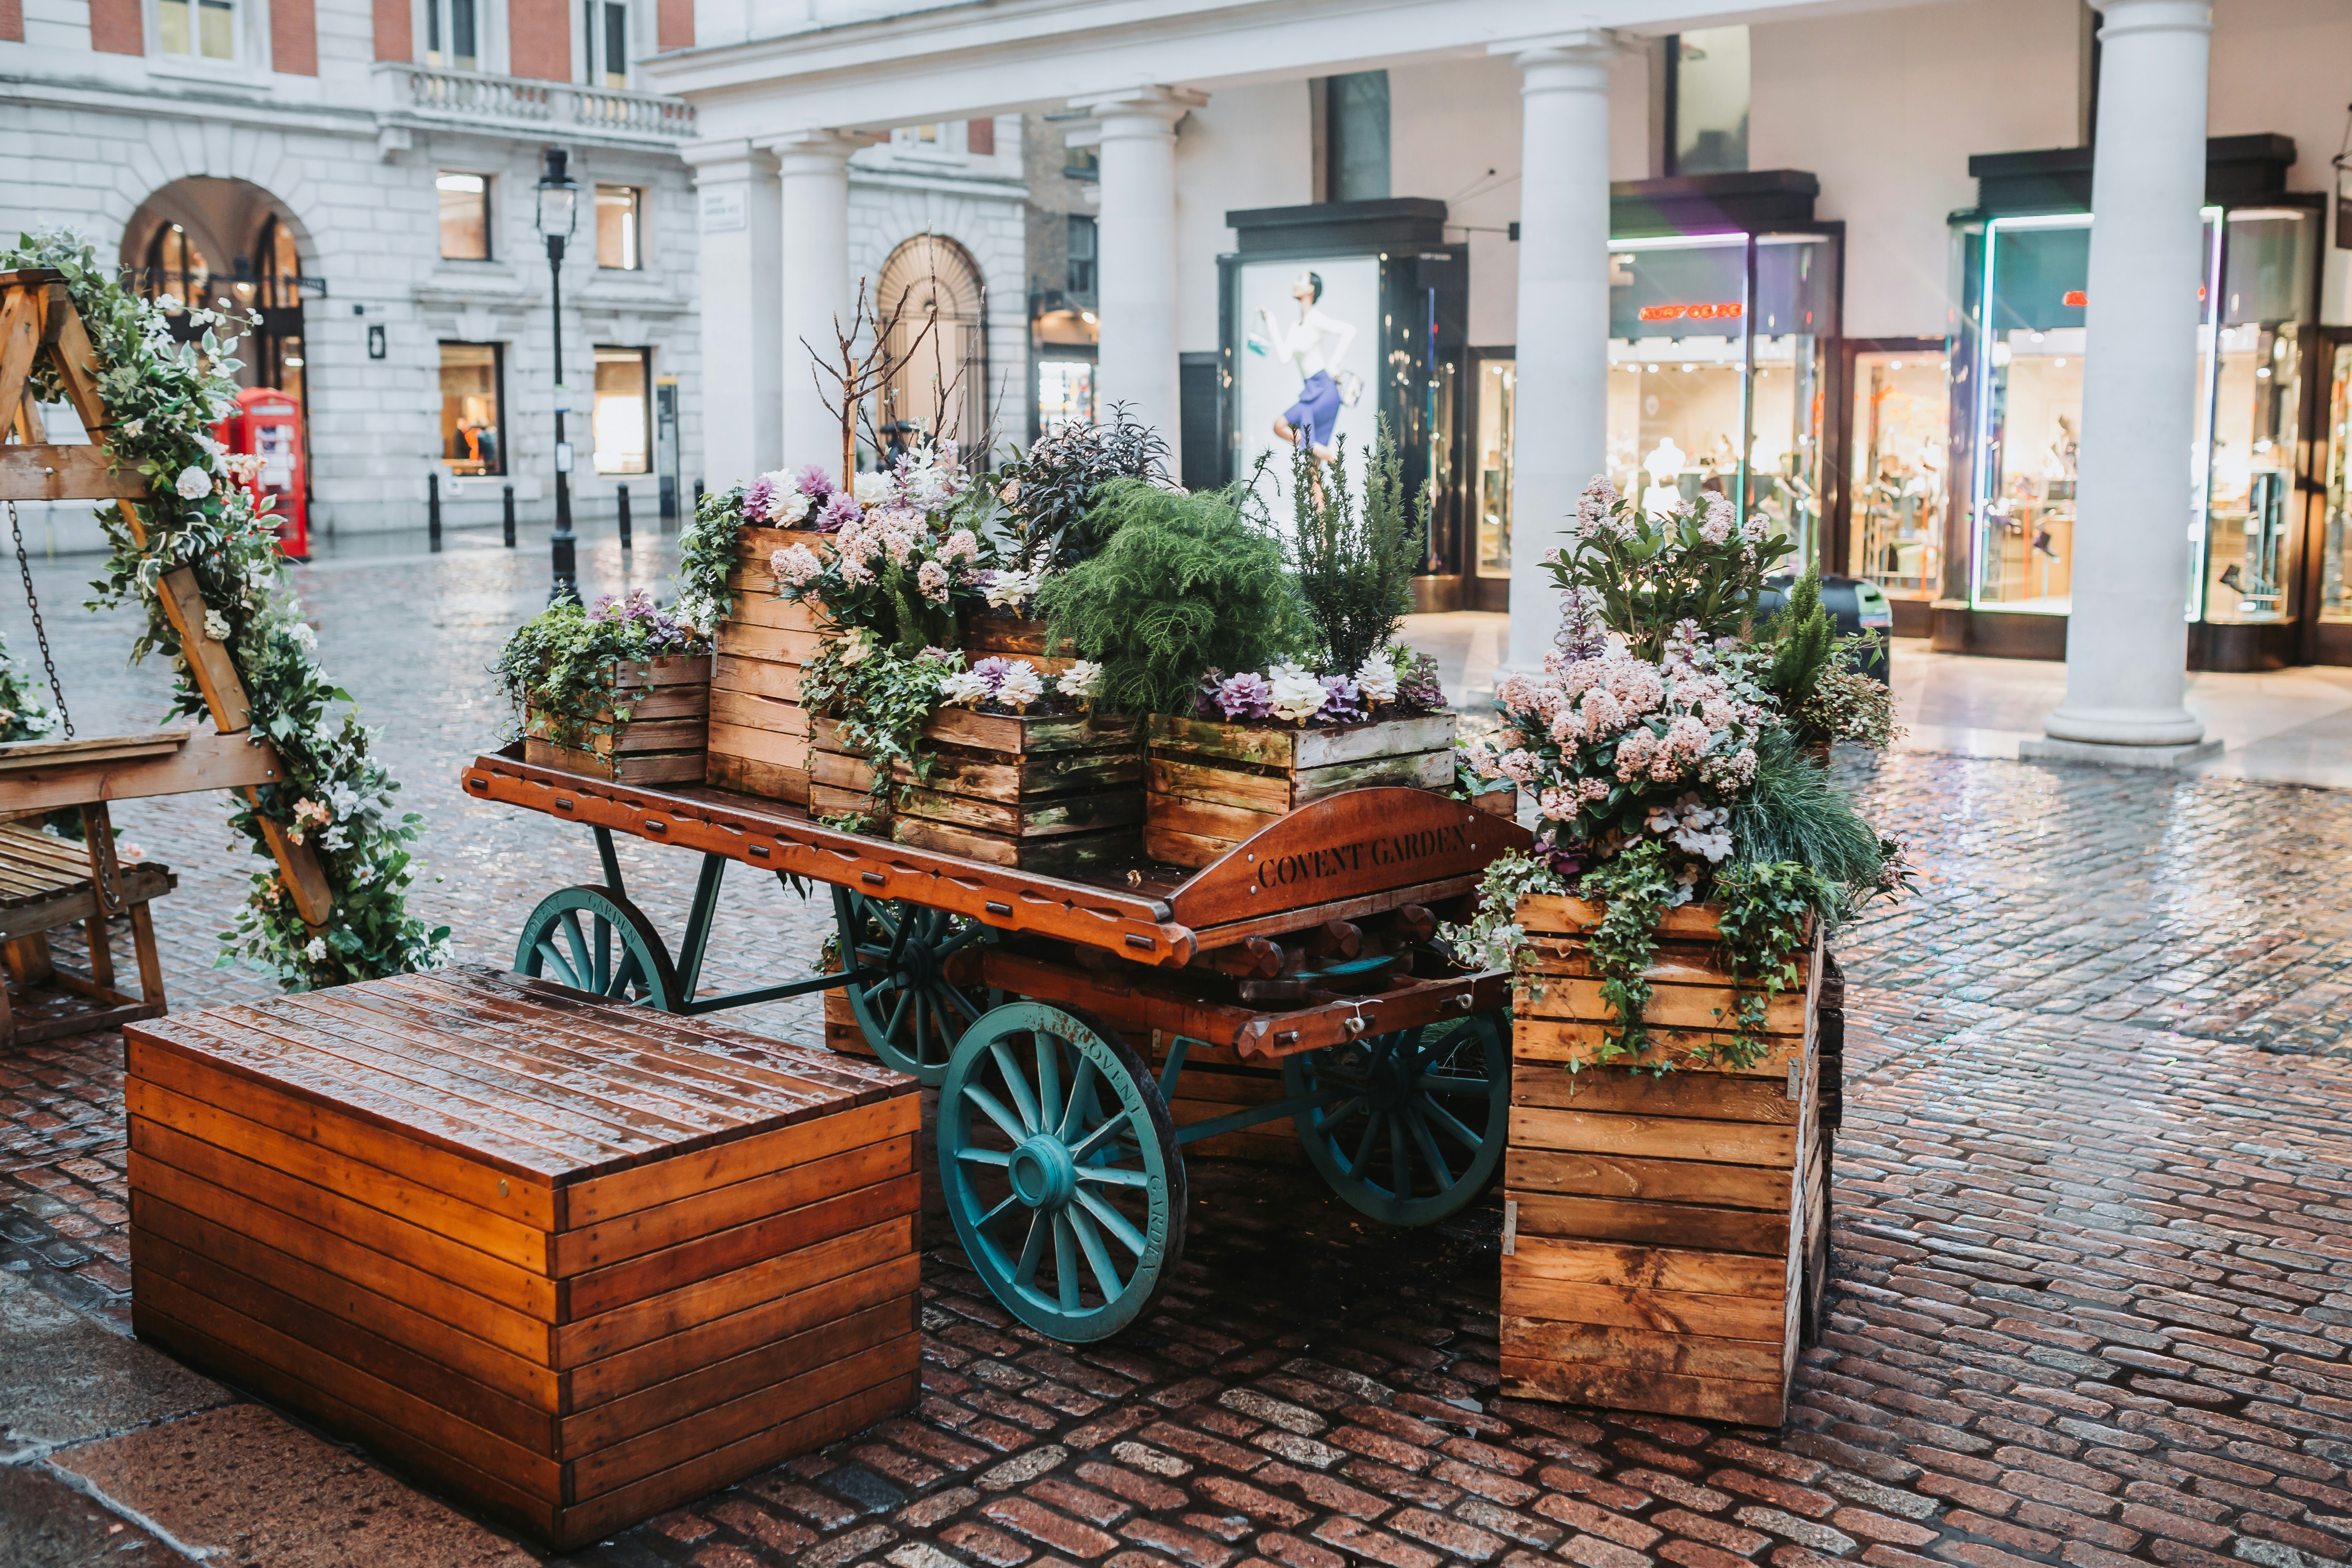 a carriage with flowers in it